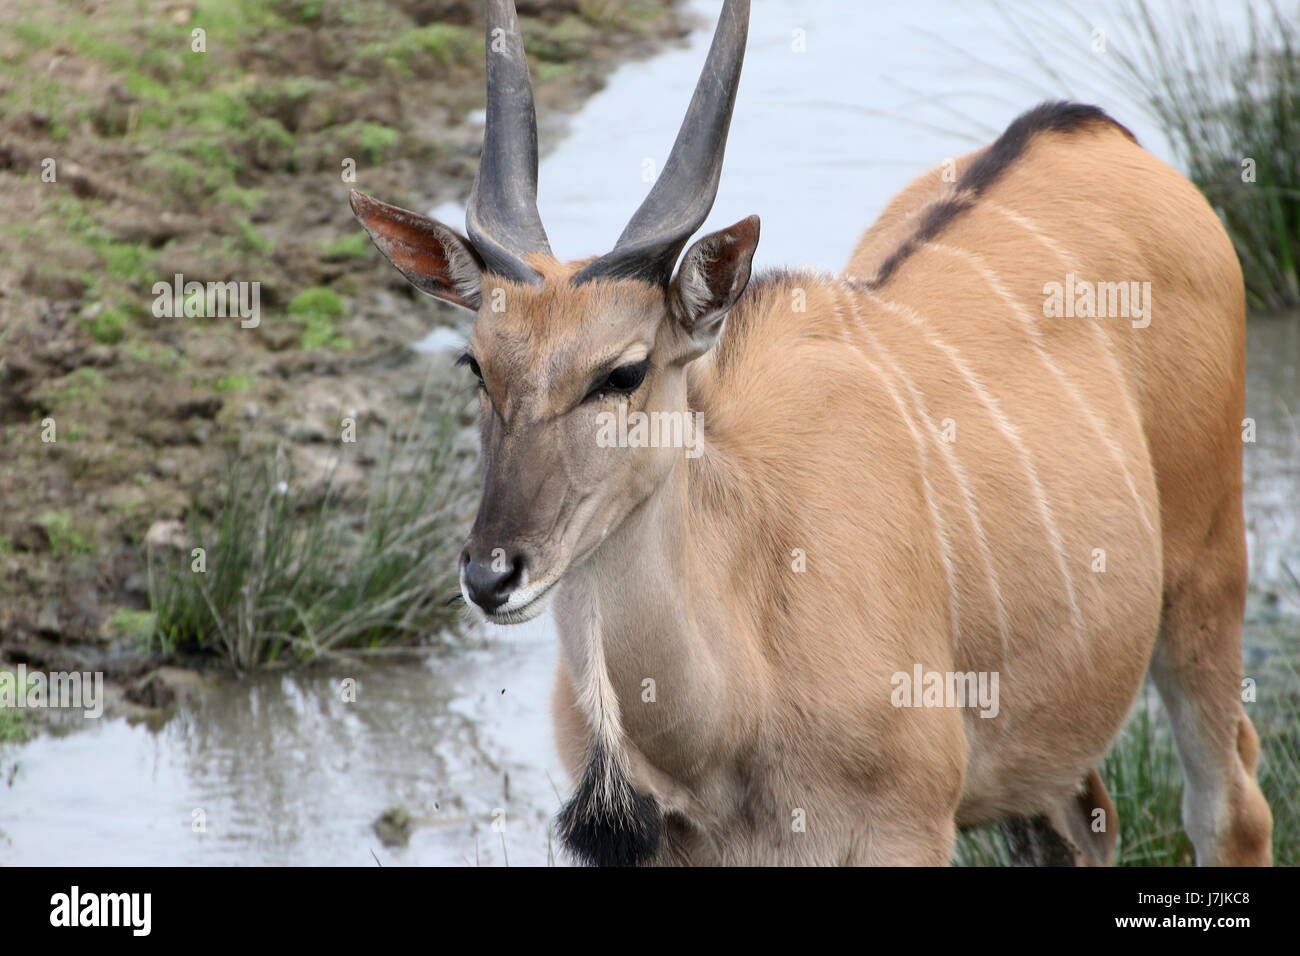 African Southern or Common Eland antelope (Taurotragus oryx ), closeup of the head. Stock Photo